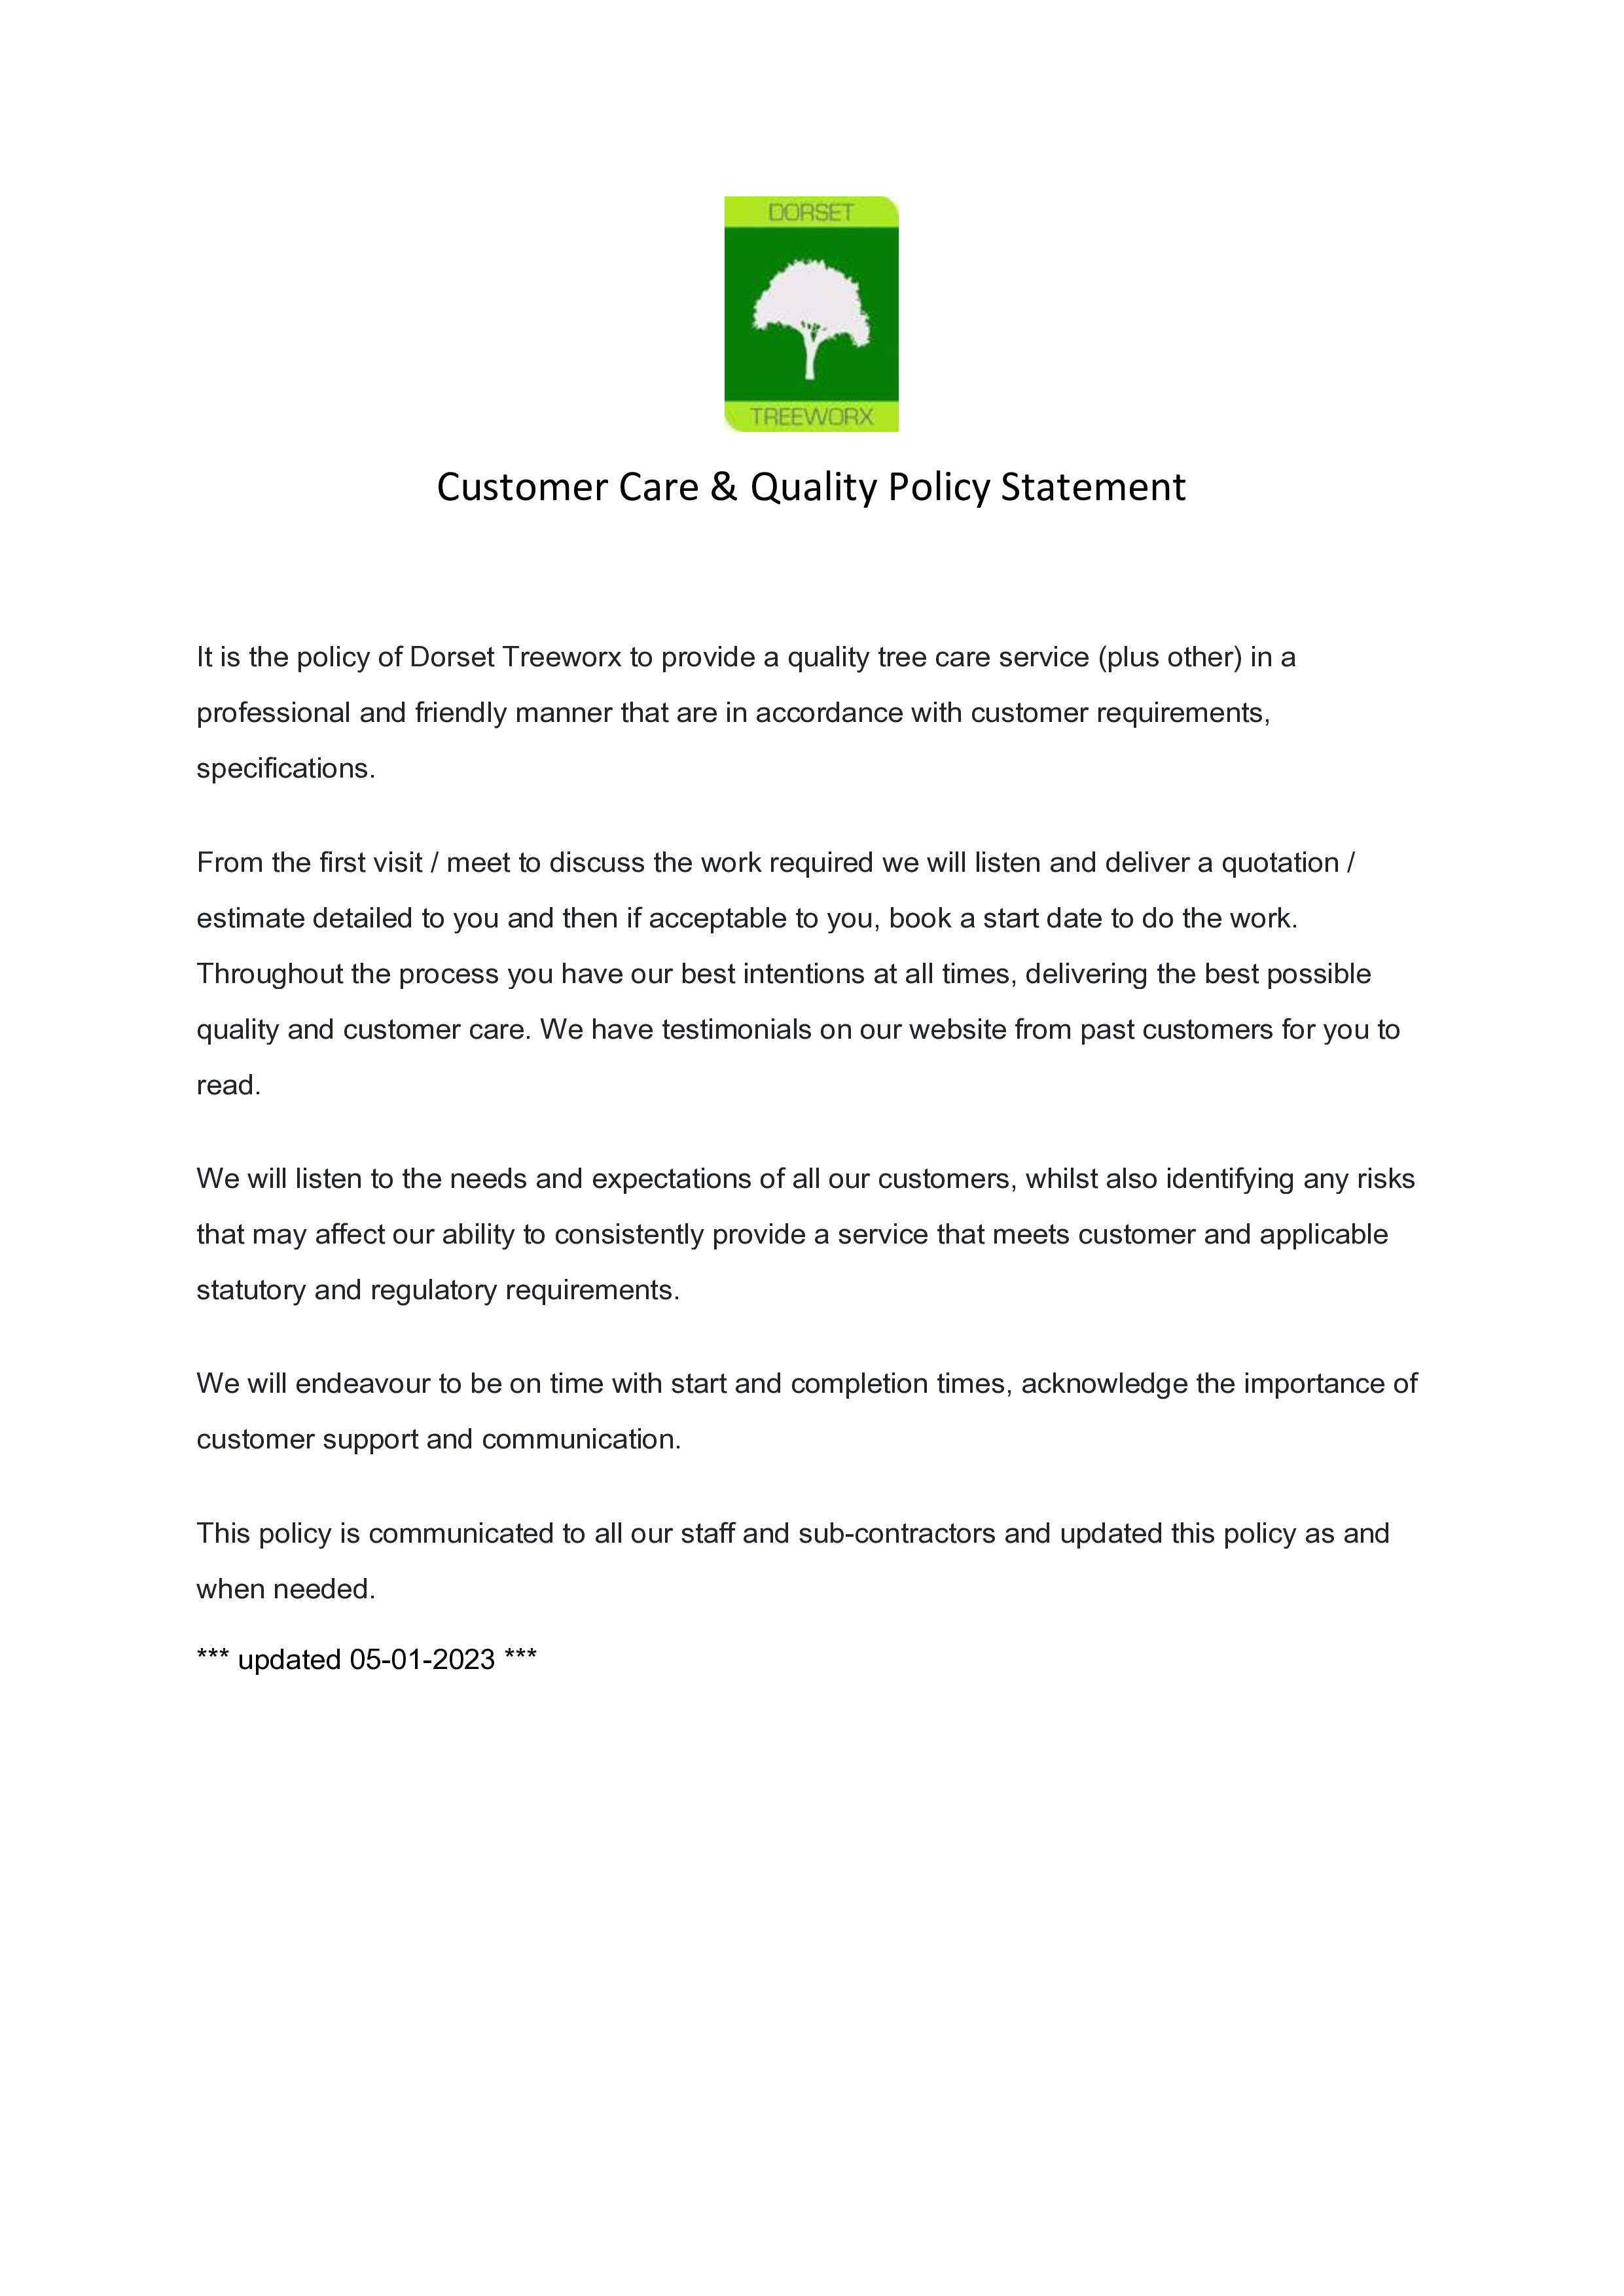 Dorset Treeworx Ltd | Customer Care & Quality Policy - Our tree surgeon team and customers in Weymouth, Dorchester, Portland in Dorset